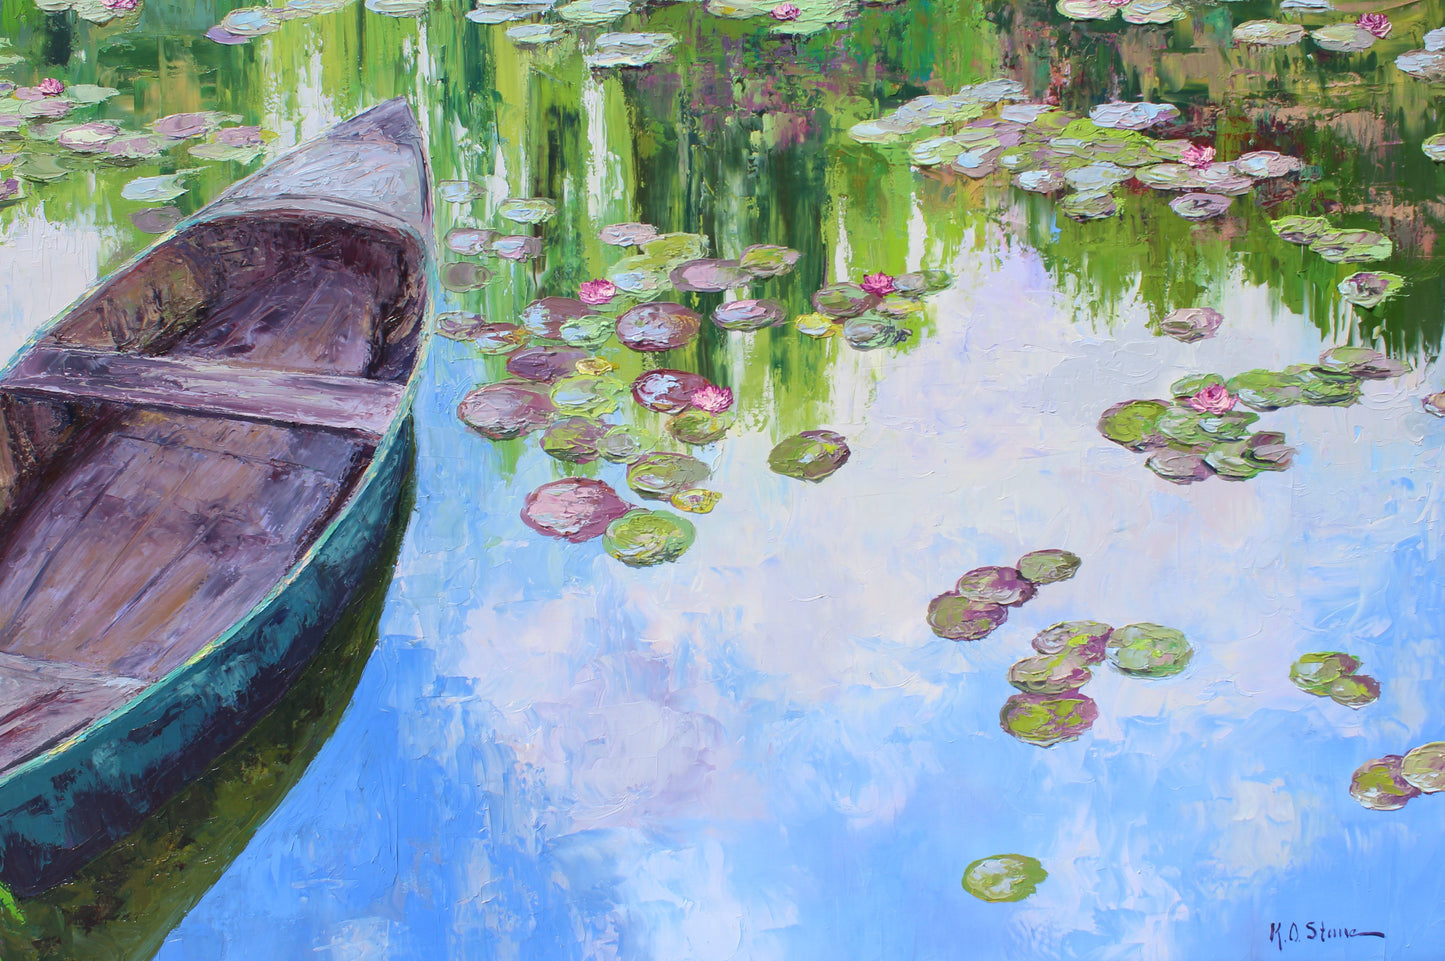 The Norwegian boat At Giverny